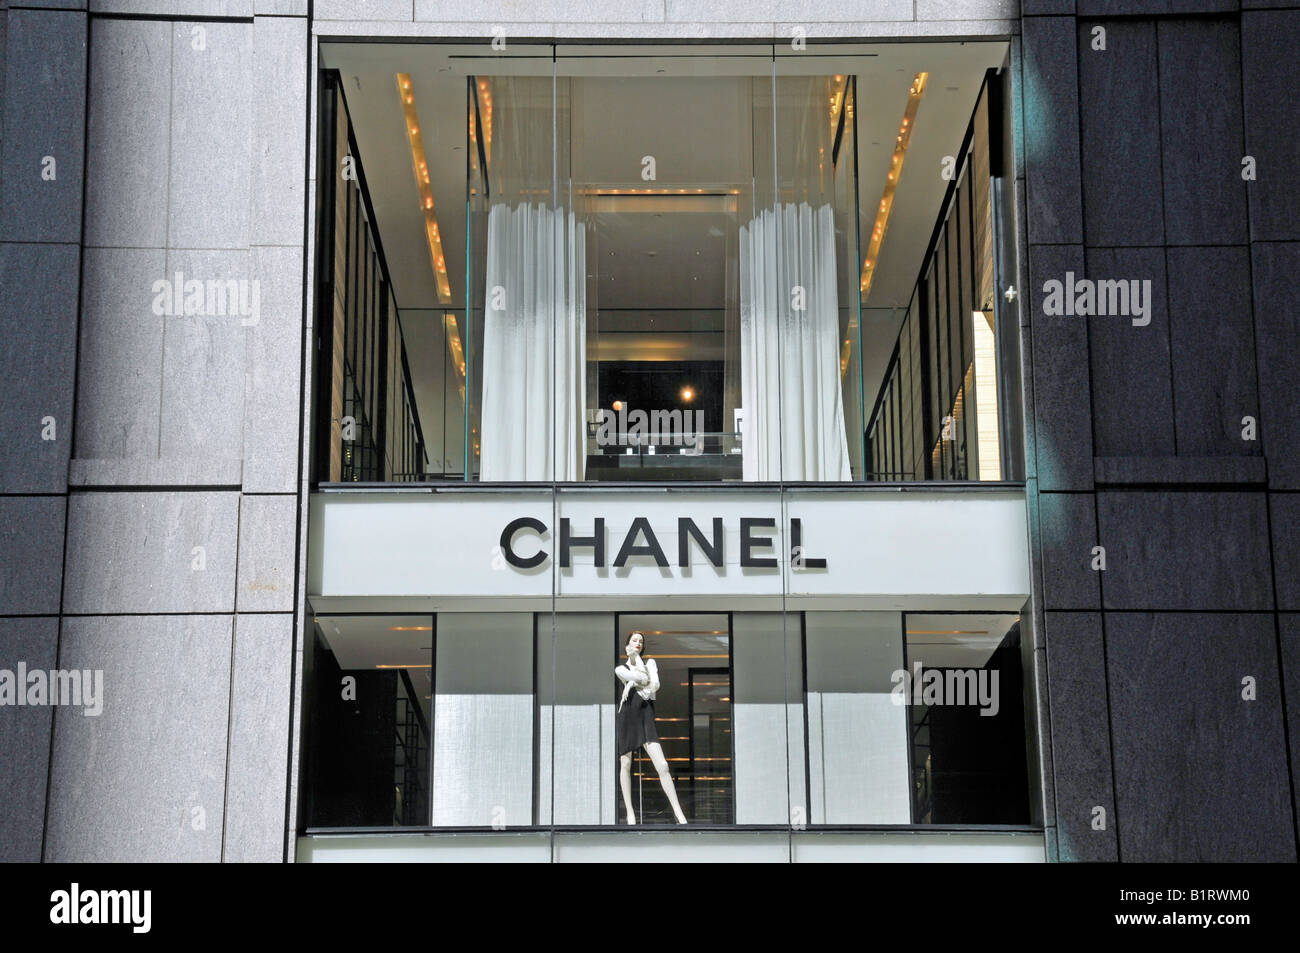 Chanel new york hi-res stock photography images -